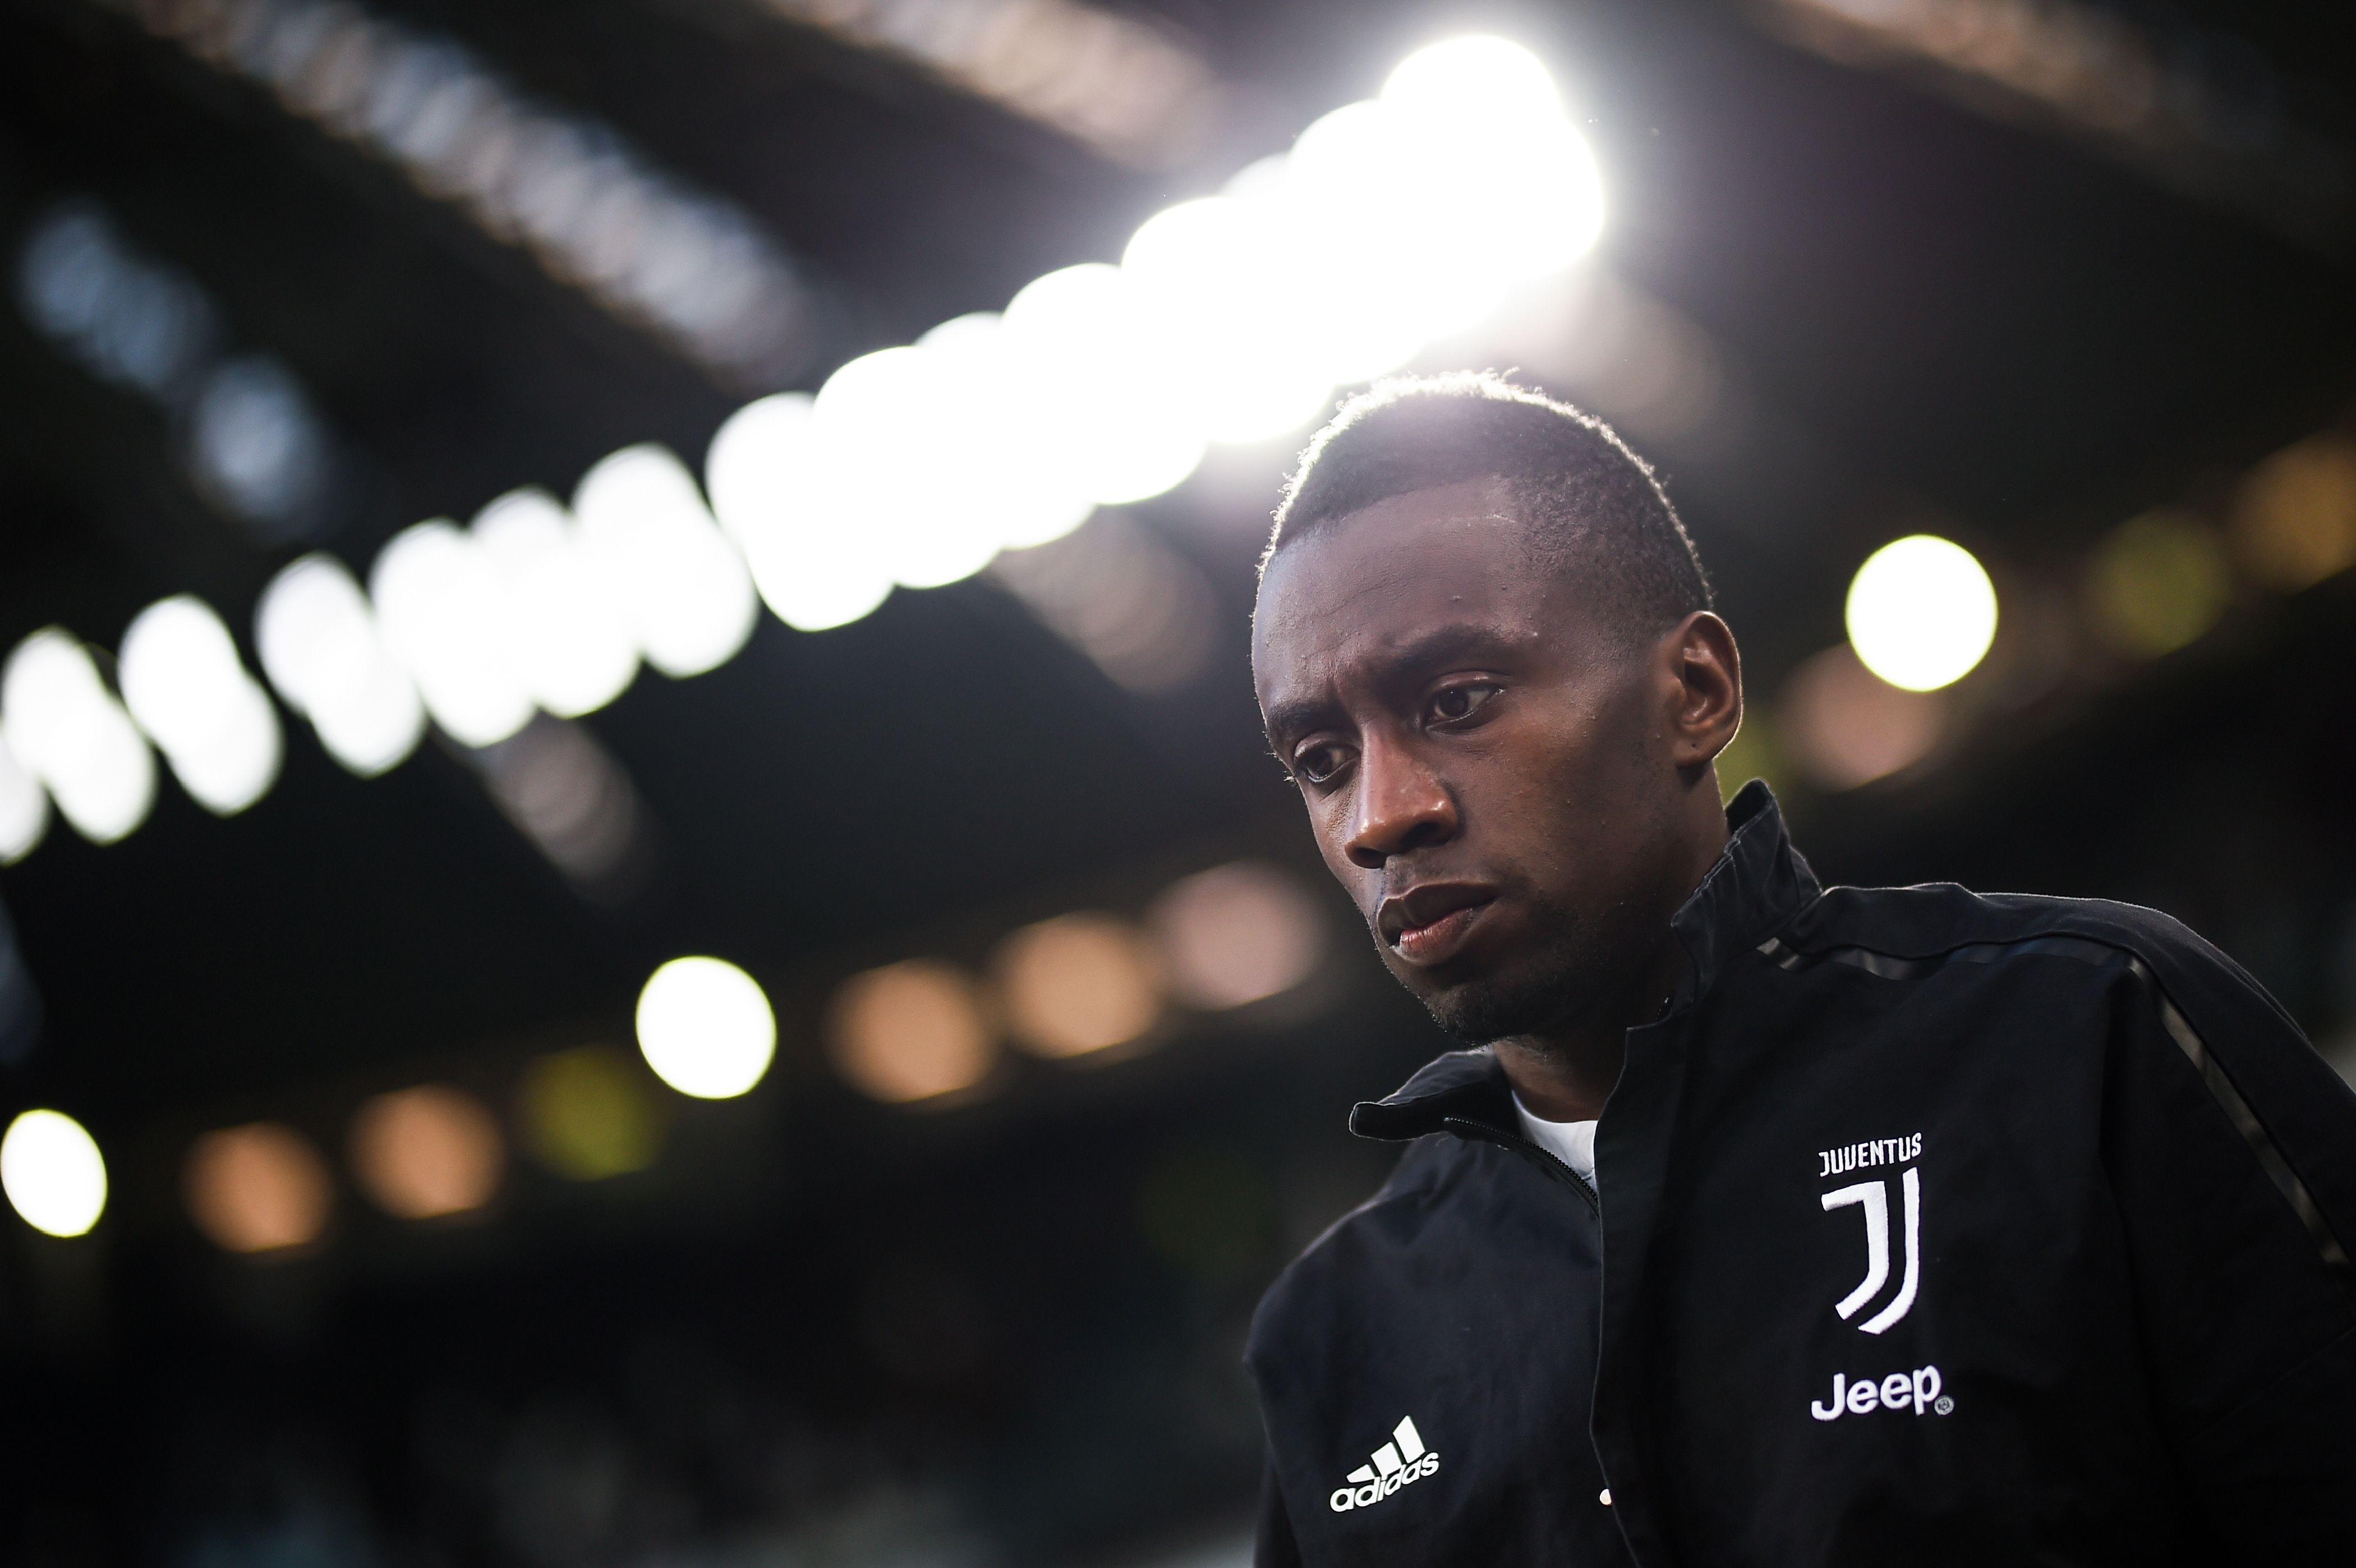 Juventus' midfielder Blaise Matuidi from France during the Italian Serie A football match between Juventus and Atalanta on March 14, 2018 at the Allianz Stadium in Turin. / AFP PHOTO / MARCO BERTORELLO        (Photo credit should read MARCO BERTORELLO/AFP/Getty Images)